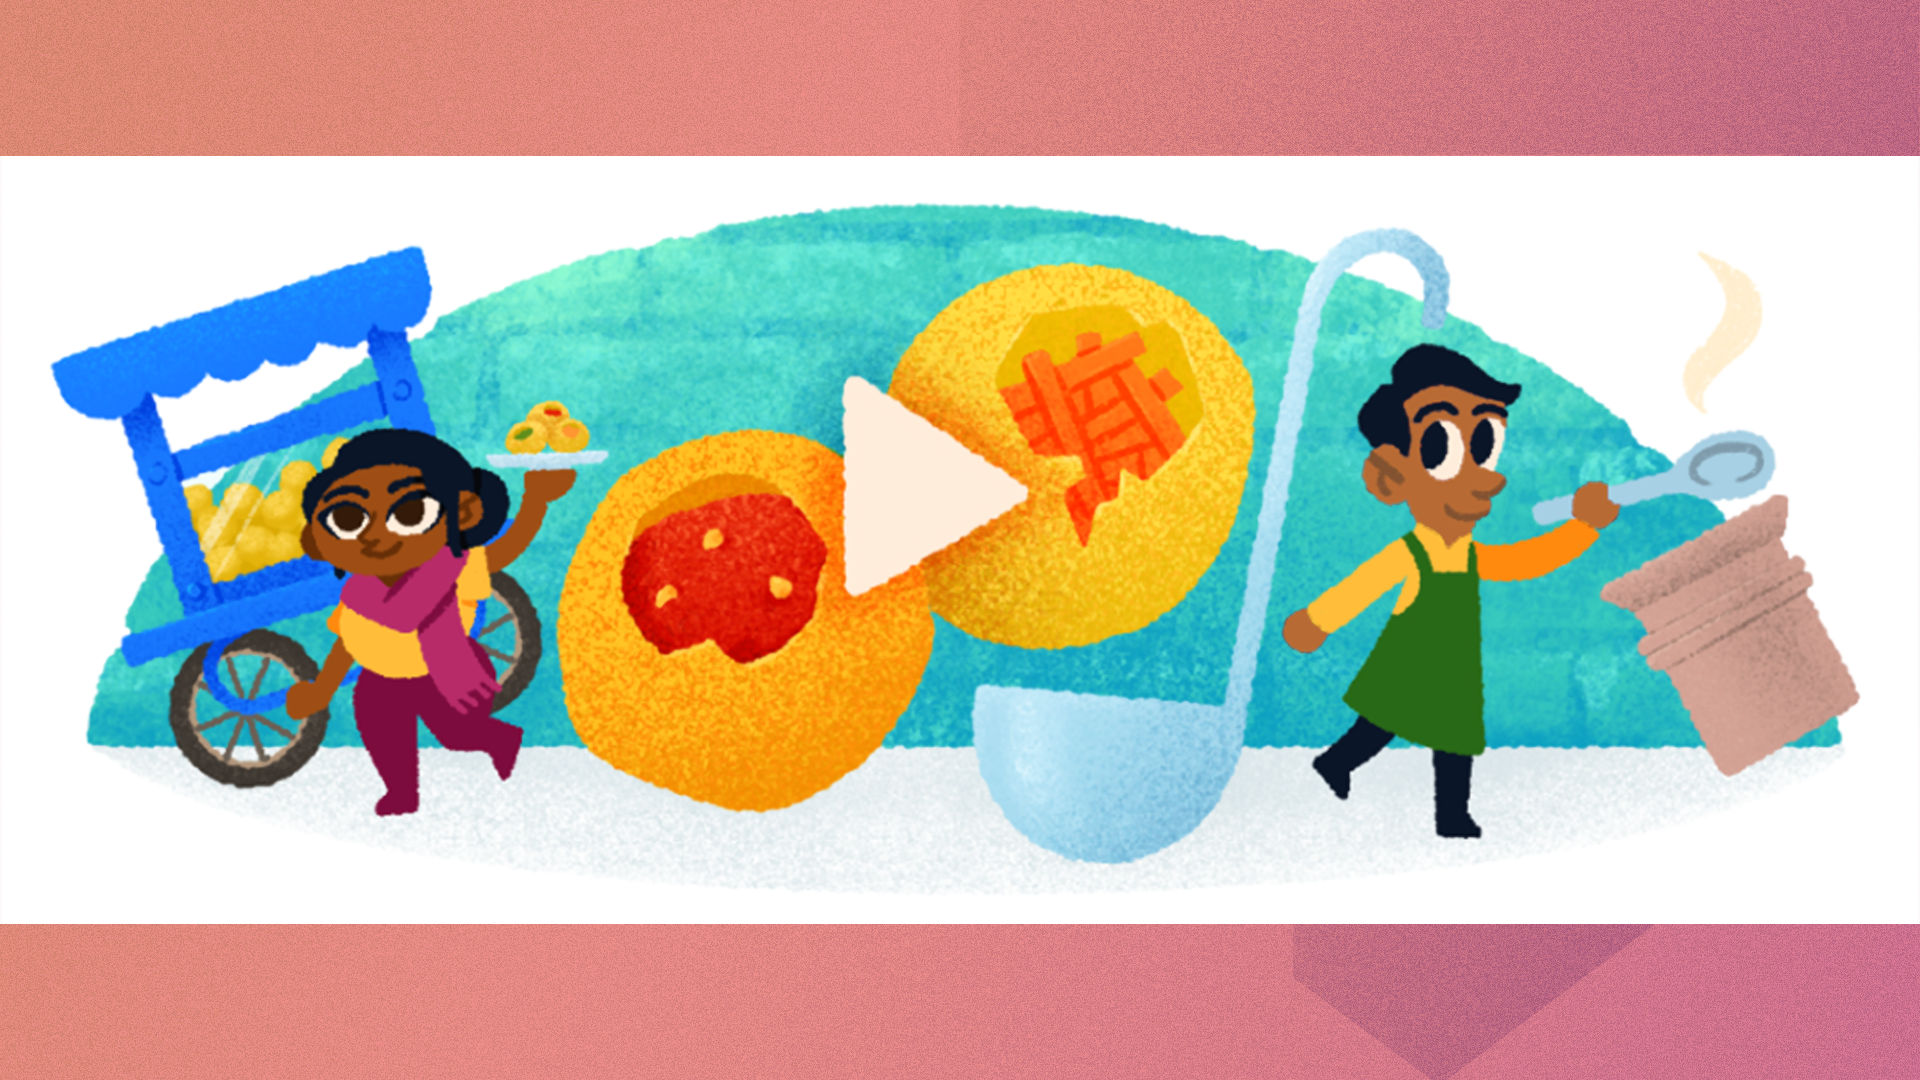 Play Google's Most Popular Doodle Games Now!